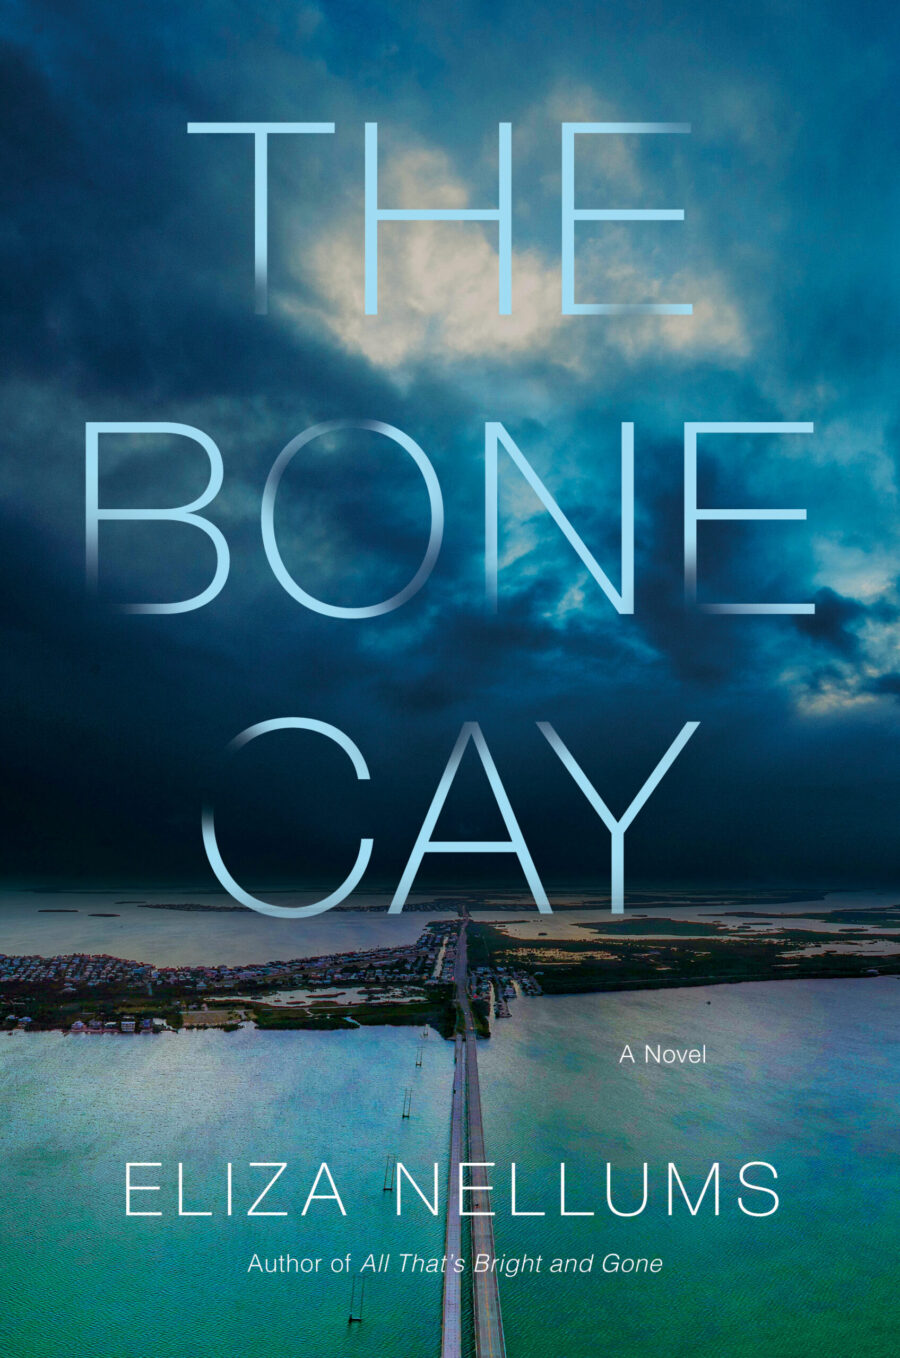 You are currently viewing The Bone Cay — Historical Thriller by Eliza Nellums